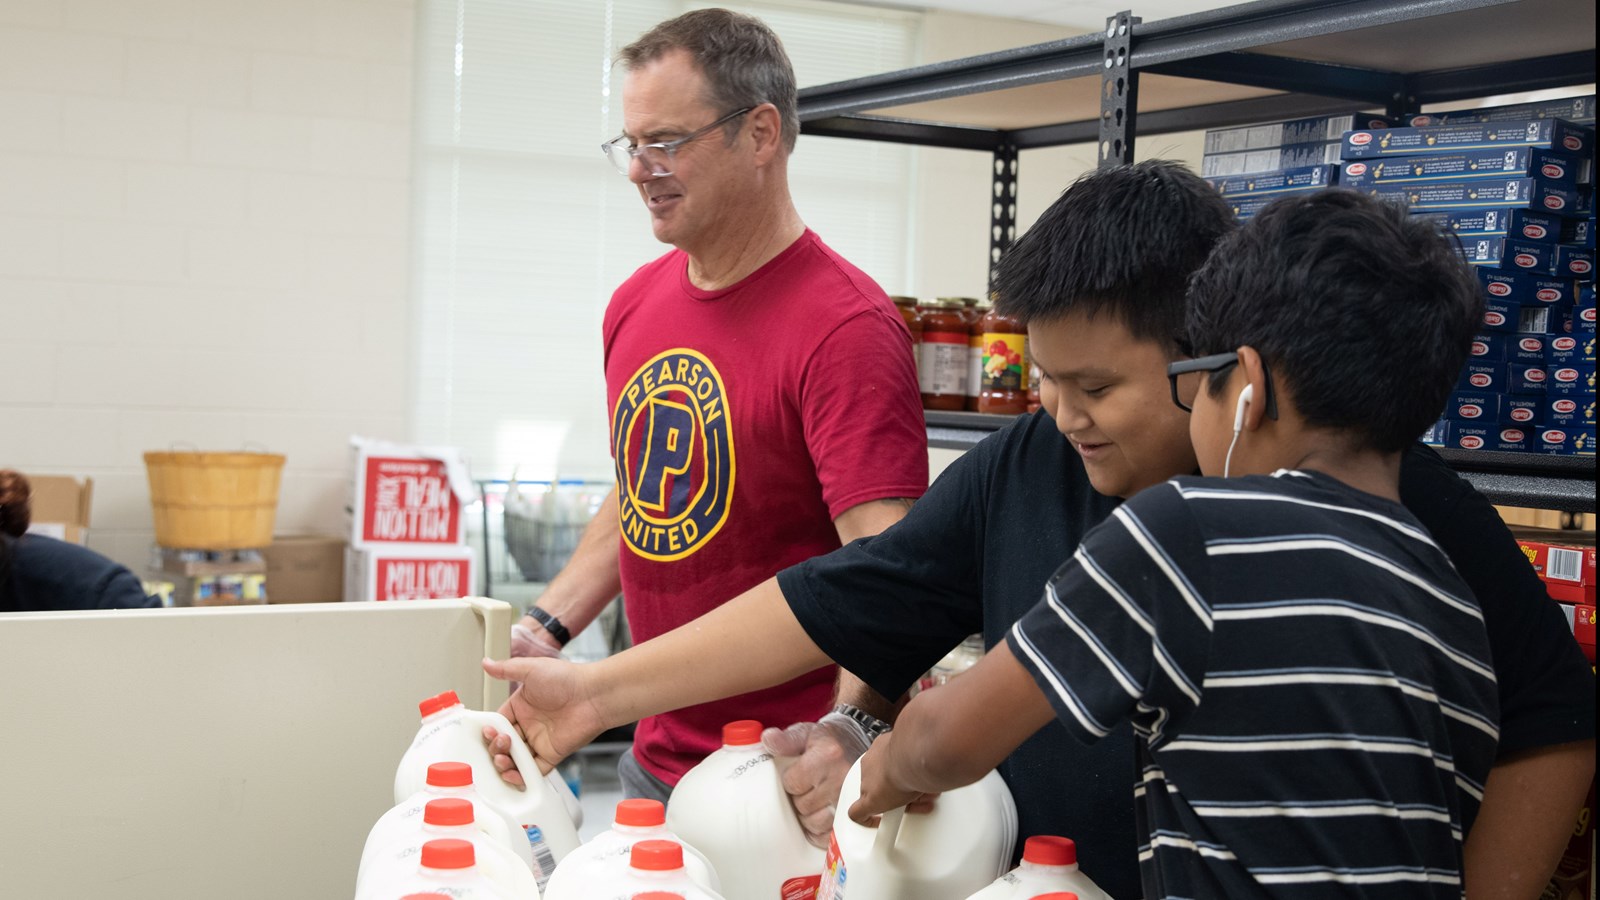 Pearson Principal Dean Yoder and students help stock fridge with milk inside The Fresh Market.